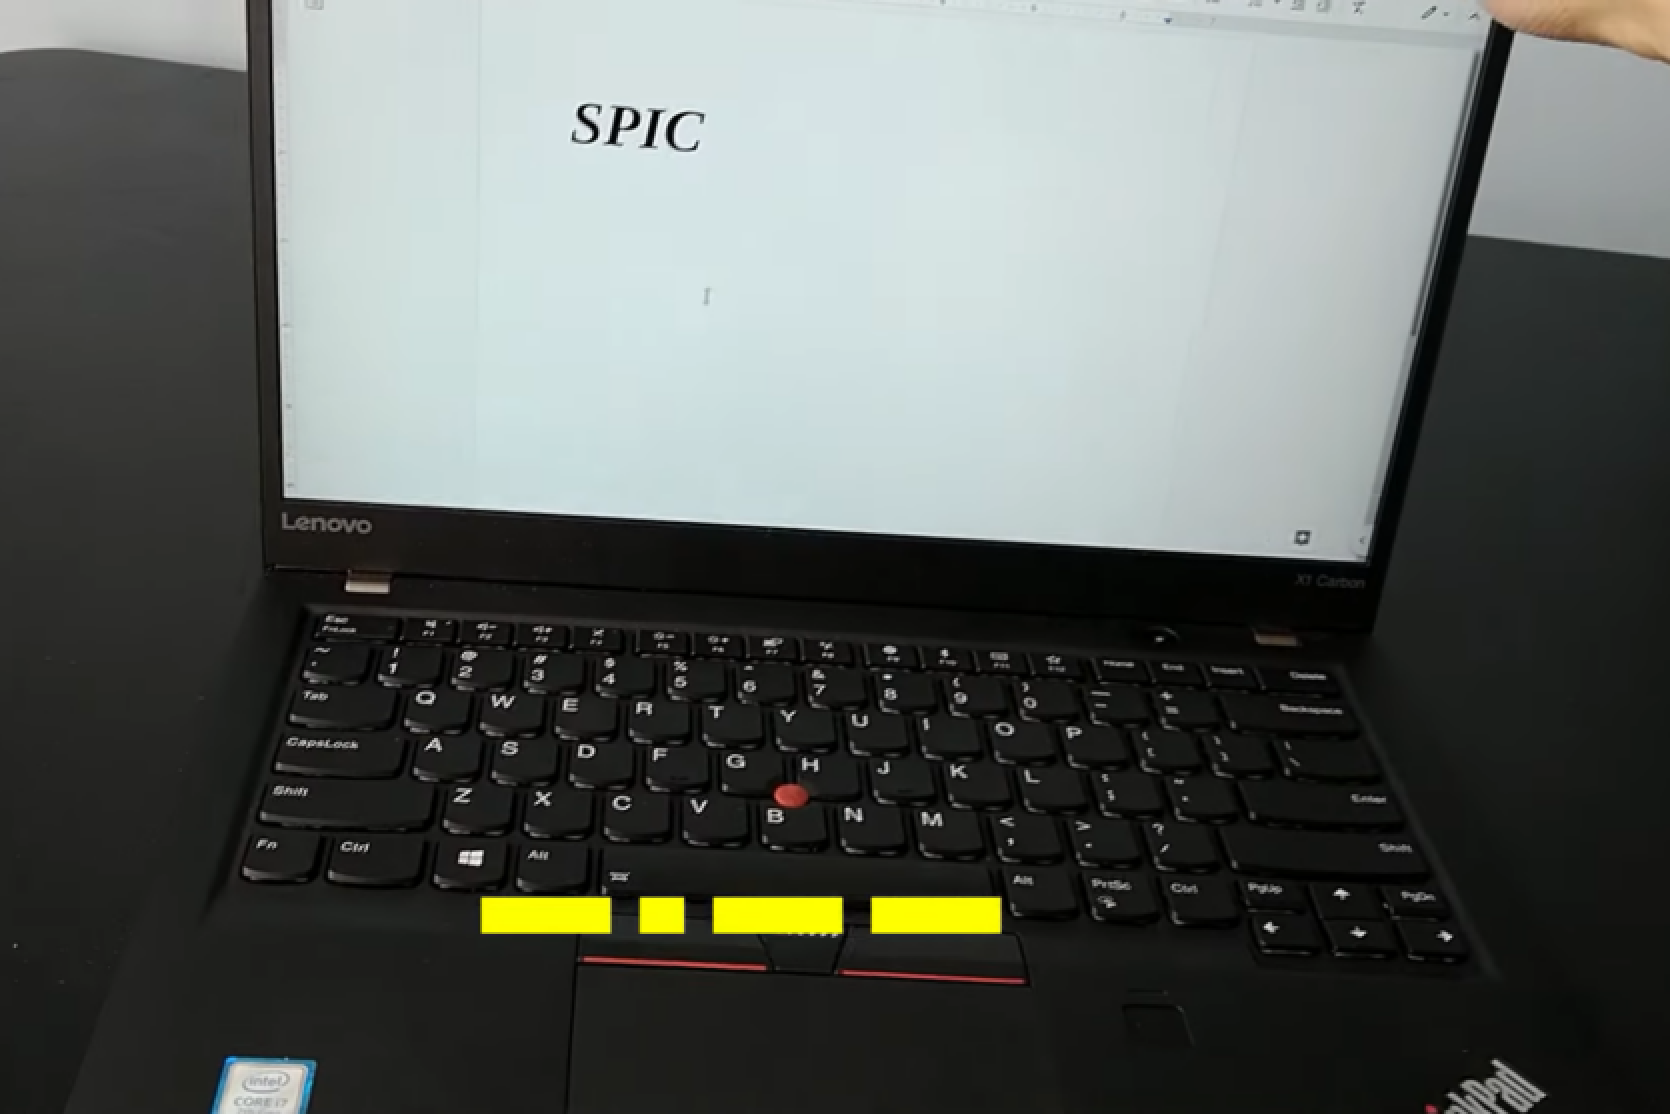 A Linux program allows you to enter text in Morse code by opening and closing the laptop lid